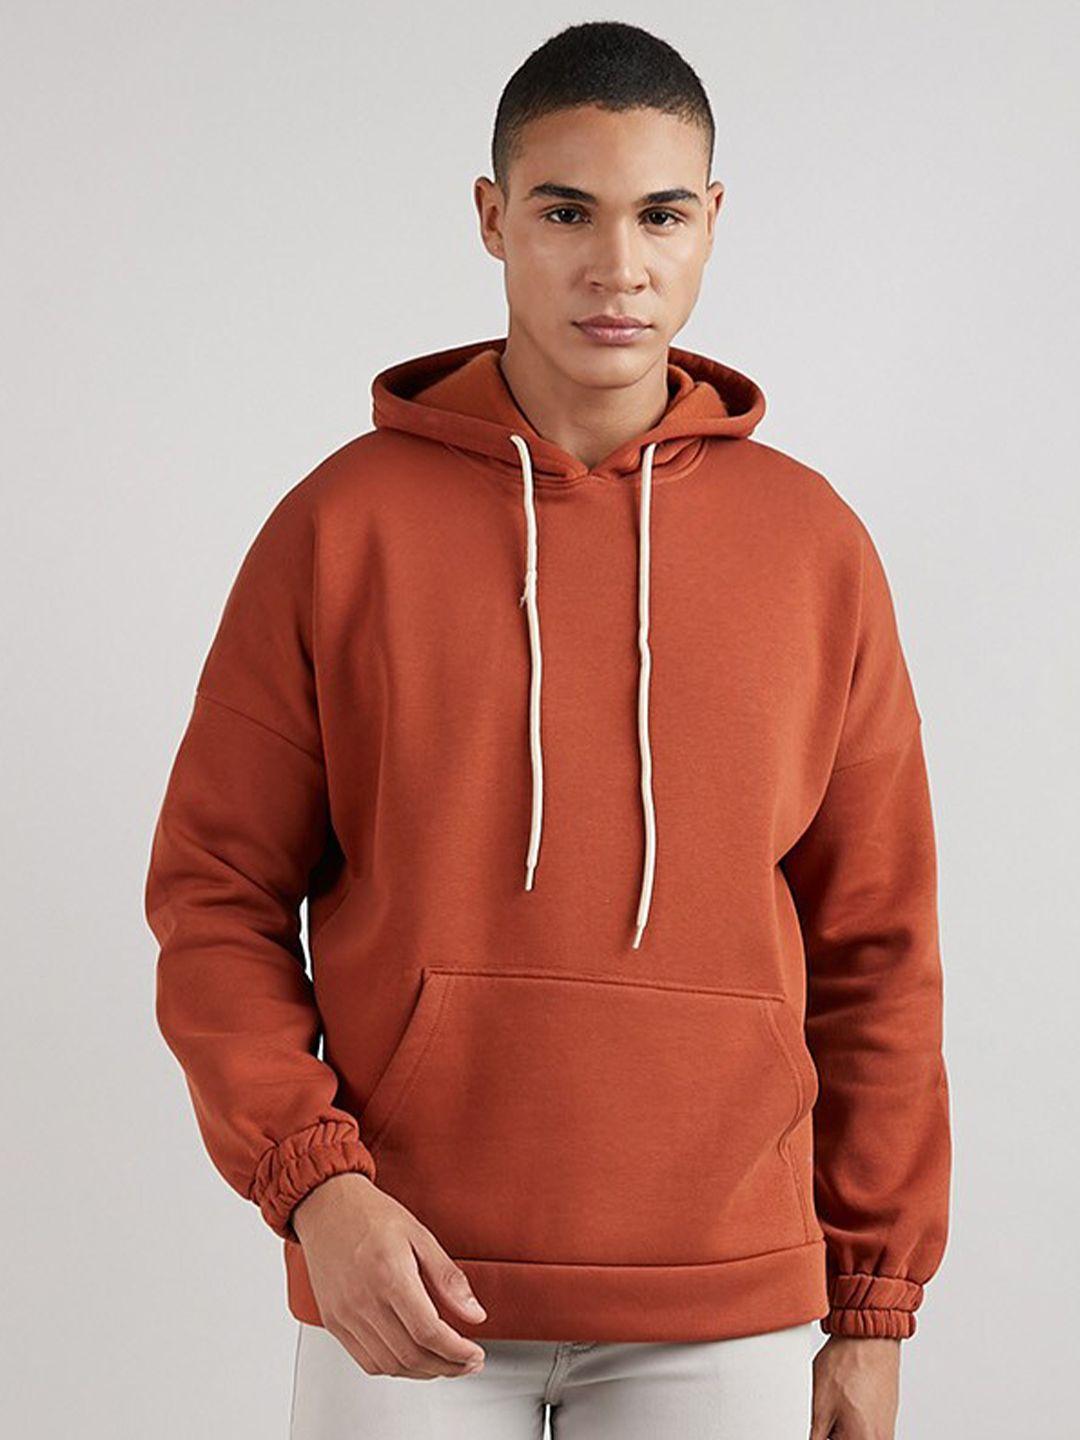 campus sutra hooded cotton pullover sweatshirt